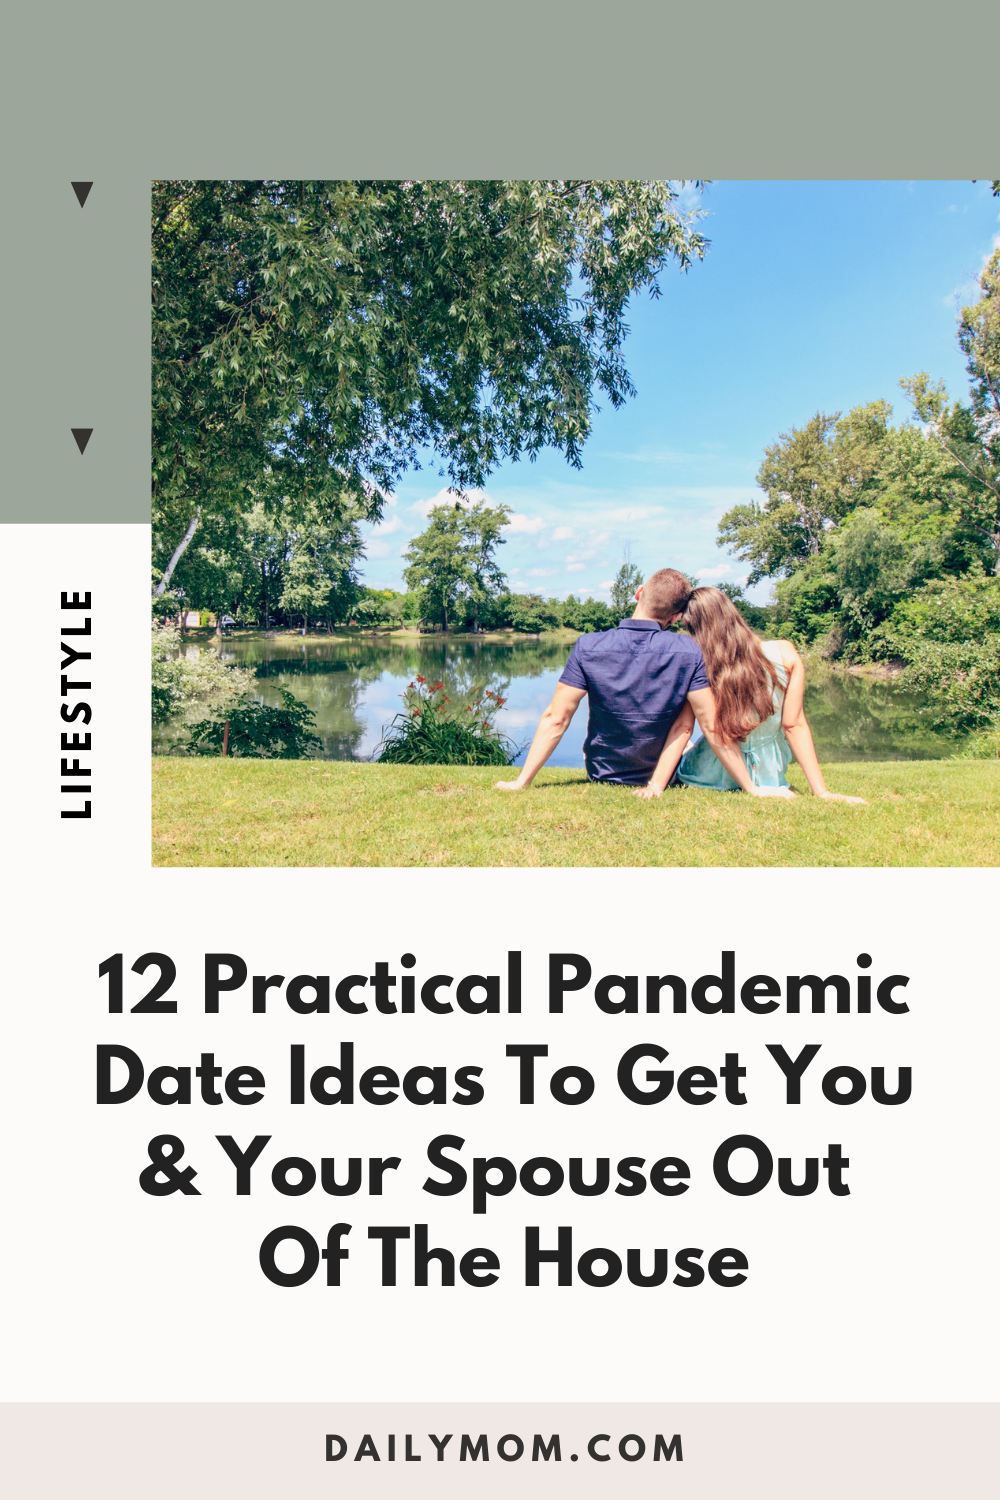 12 Practical Pandemic Date Ideas To Get You & Your Spouse Out Of The House